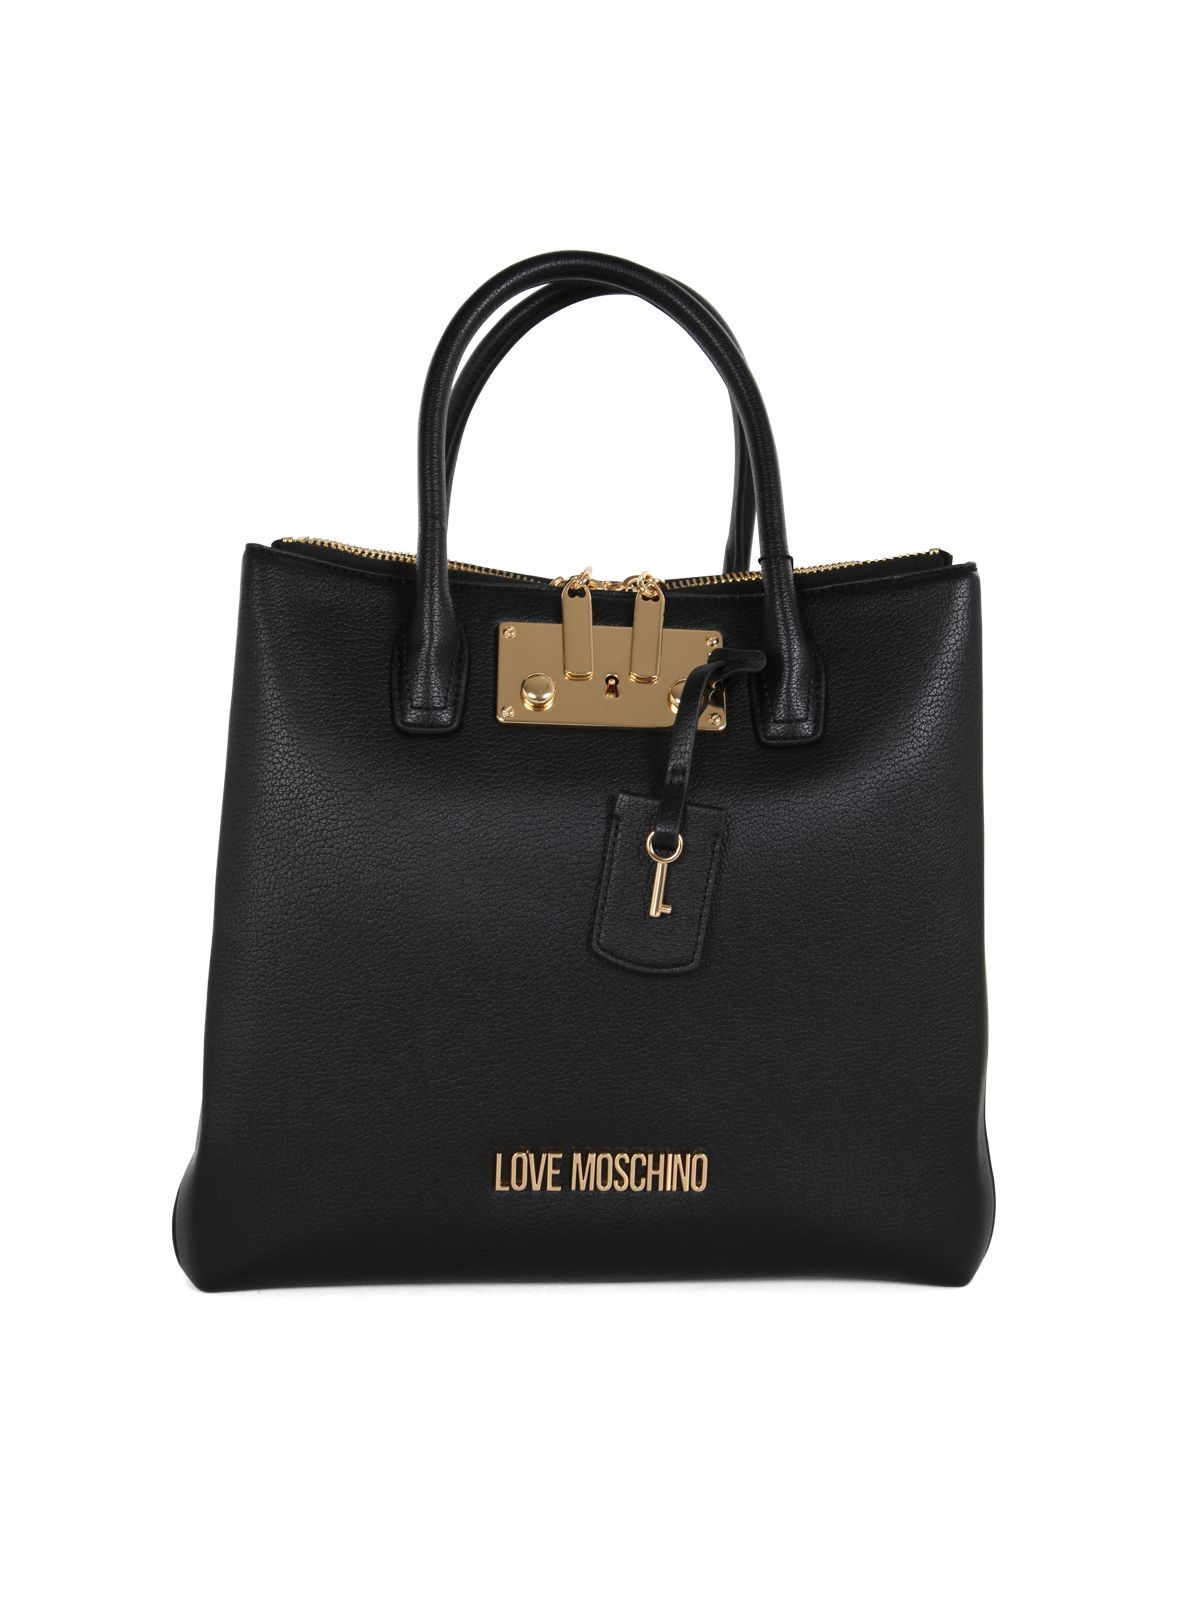 Love Moschino Tote With Top Handle In Black